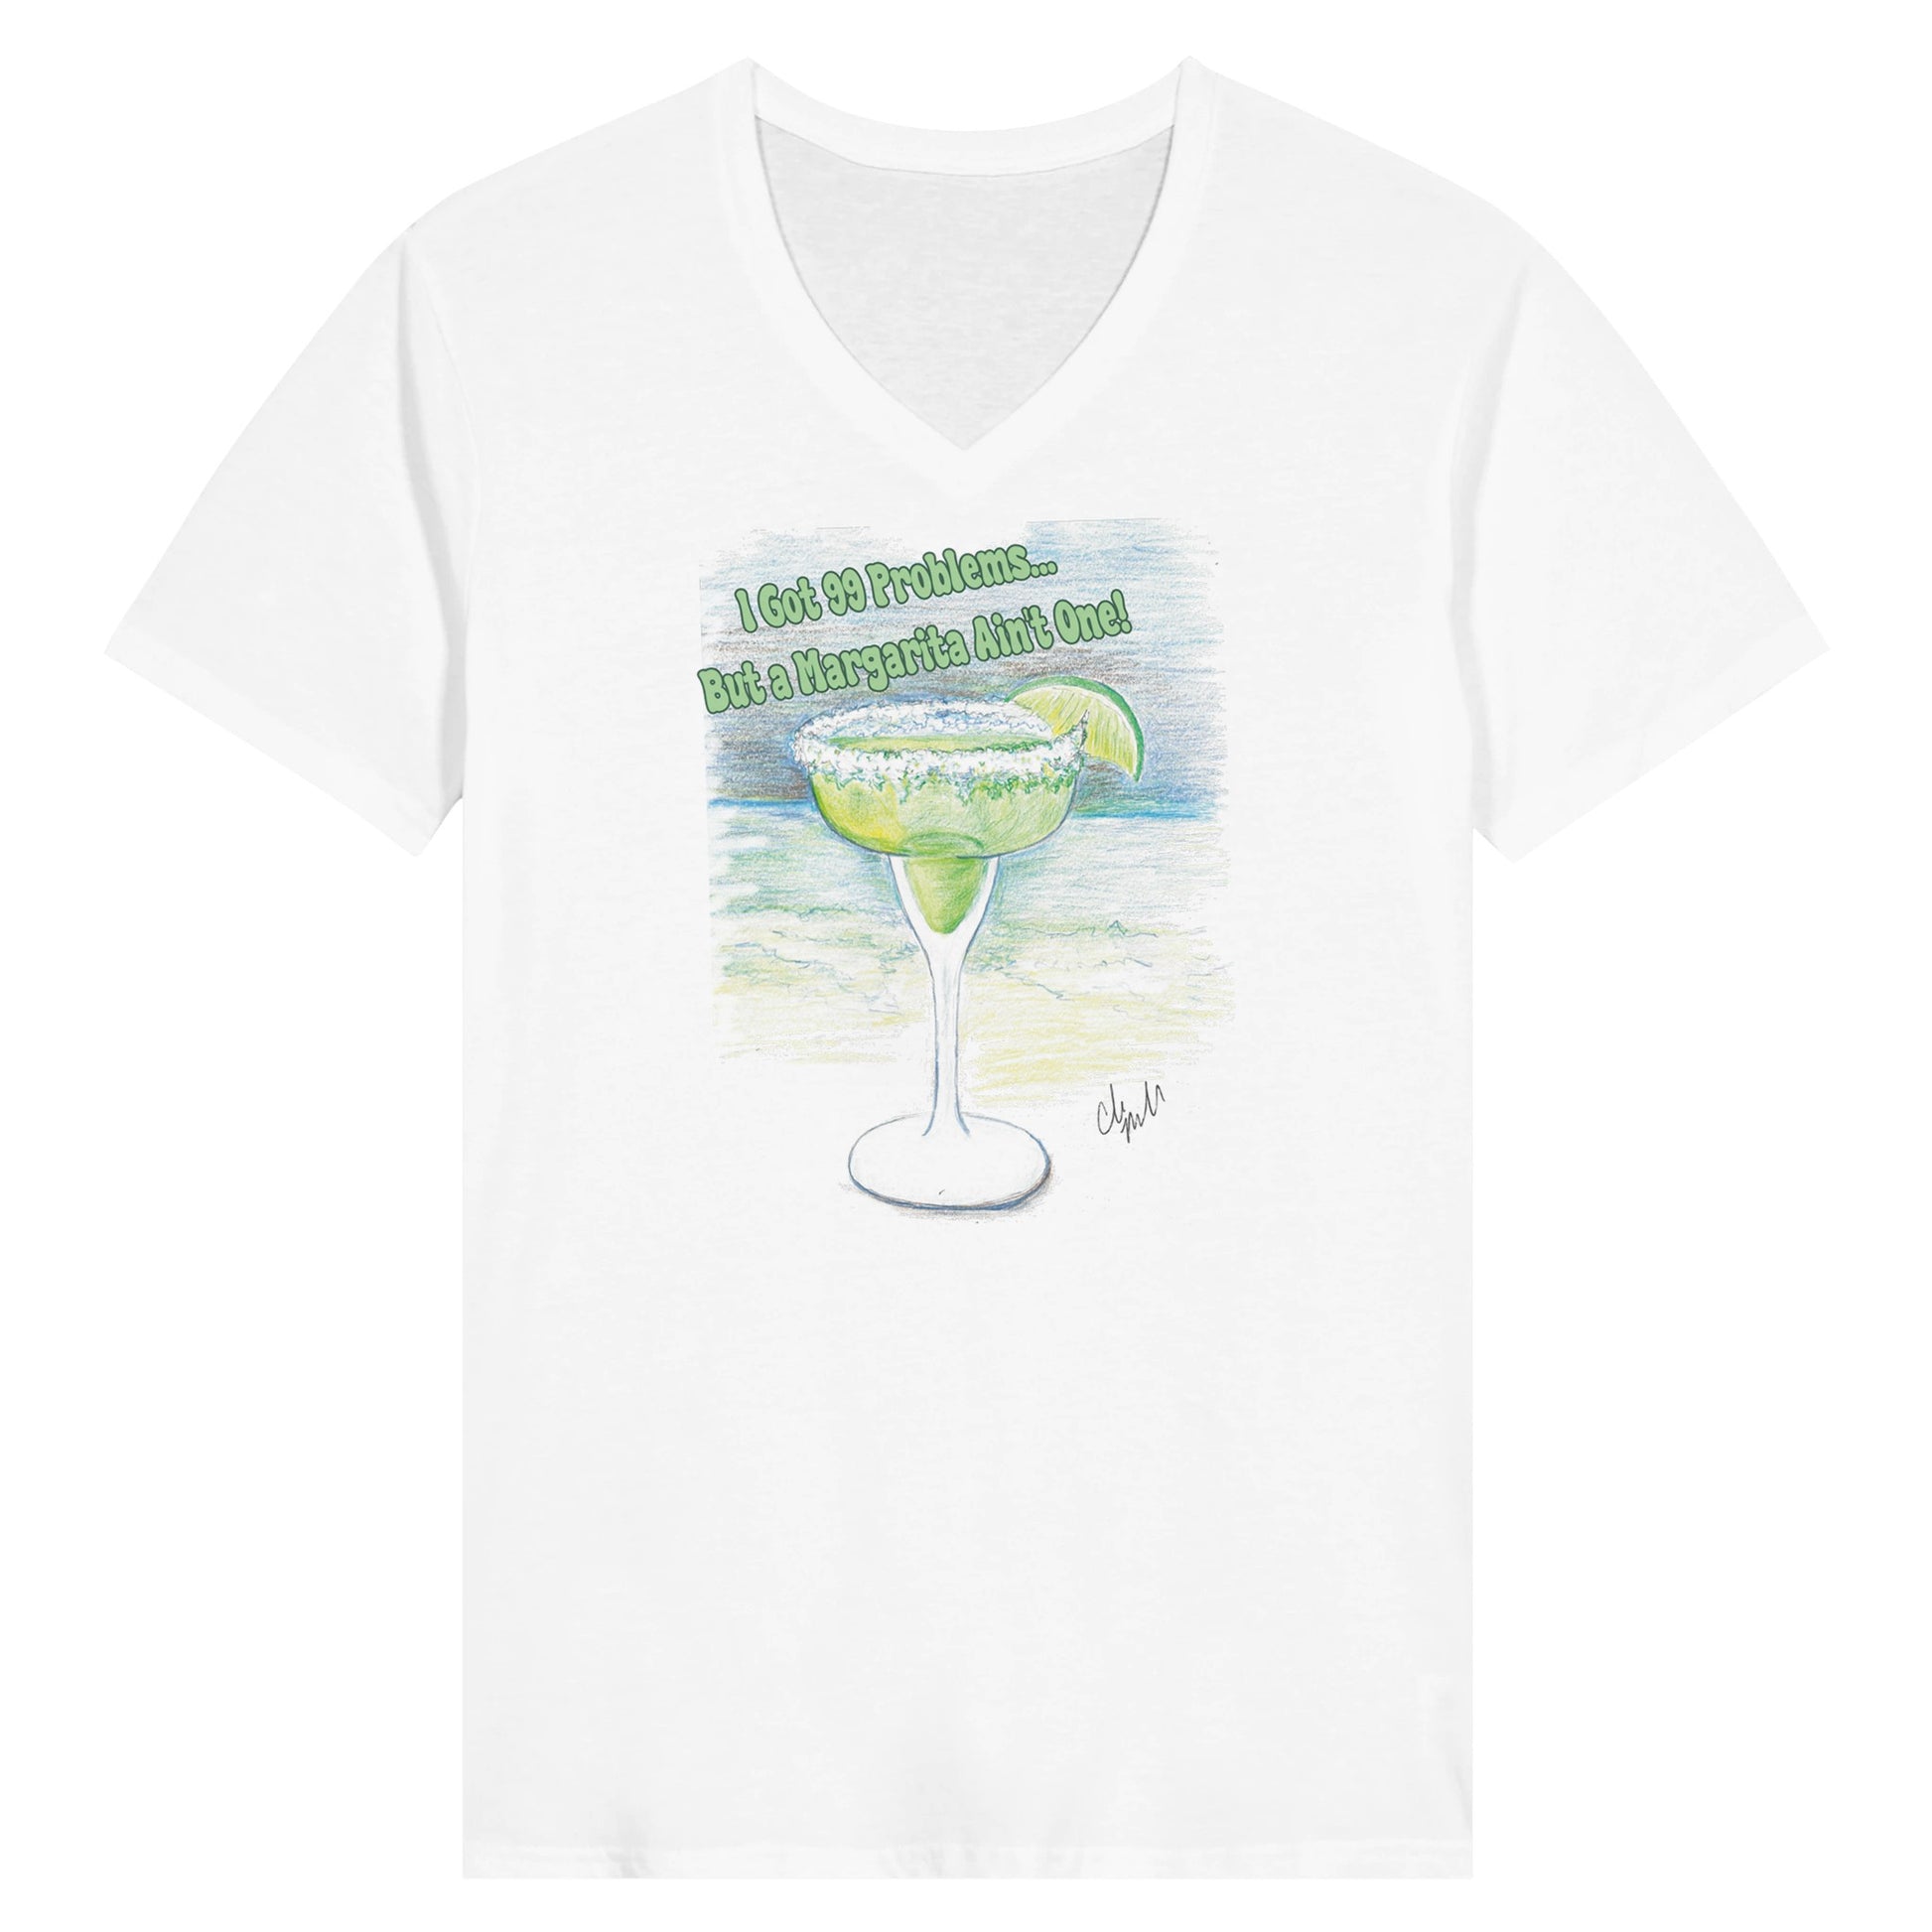 Women’s premium White V-neck t-shirt with original artwork and motto I Got 99 Problems But a Margarita Aint One from WhatYa Say Apparel.